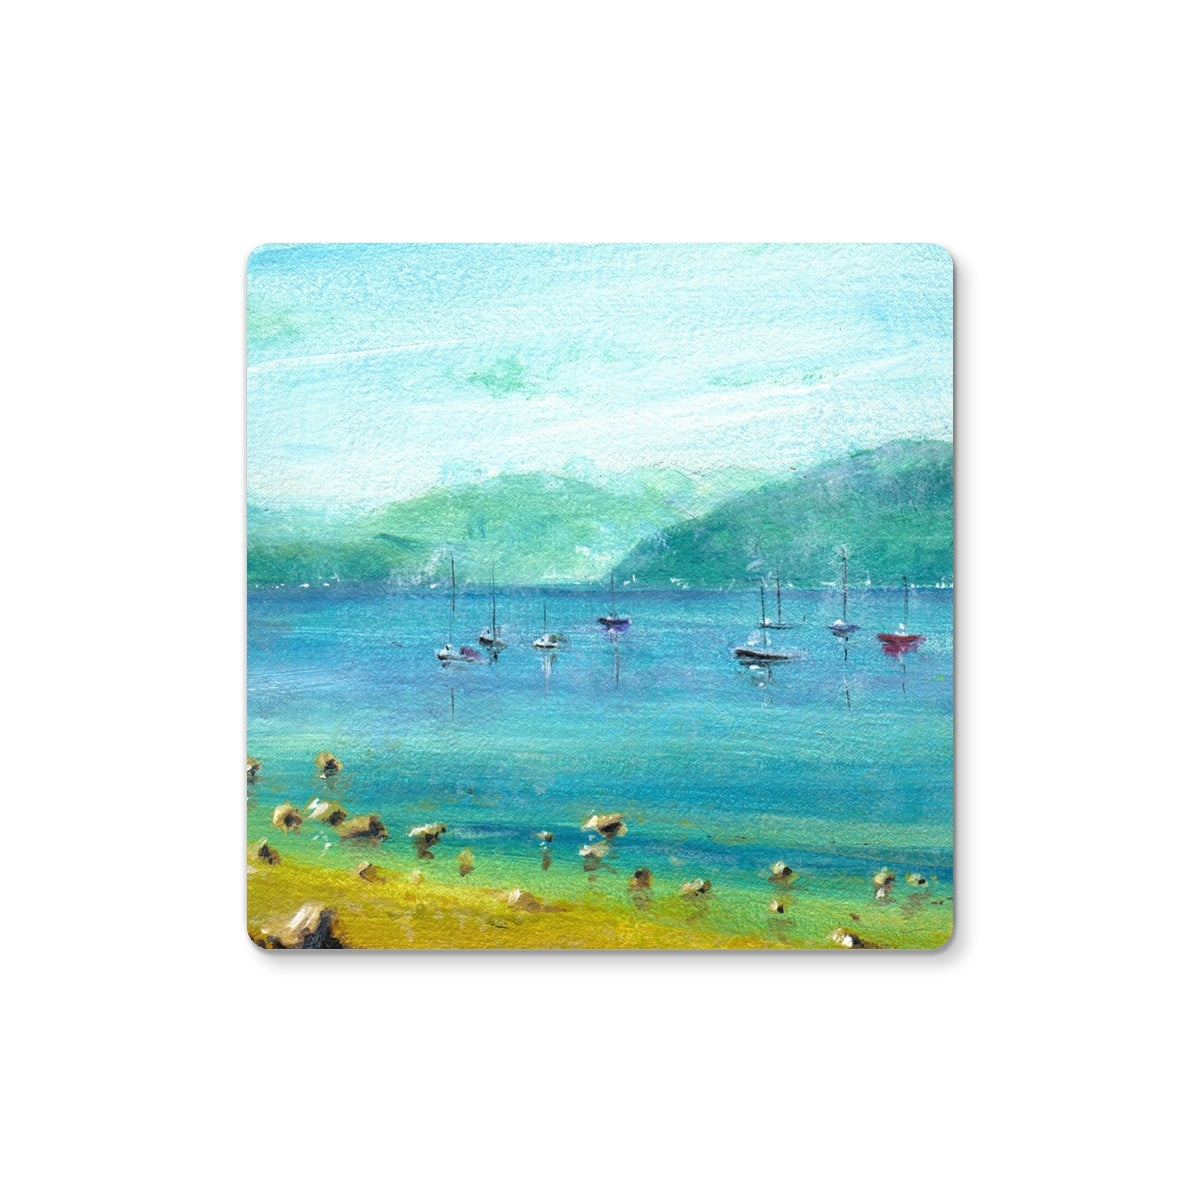 A Clyde Summer Day Art Gifts Coaster-Coasters-River Clyde Art Gallery-Single Coaster-Paintings, Prints, Homeware, Art Gifts From Scotland By Scottish Artist Kevin Hunter